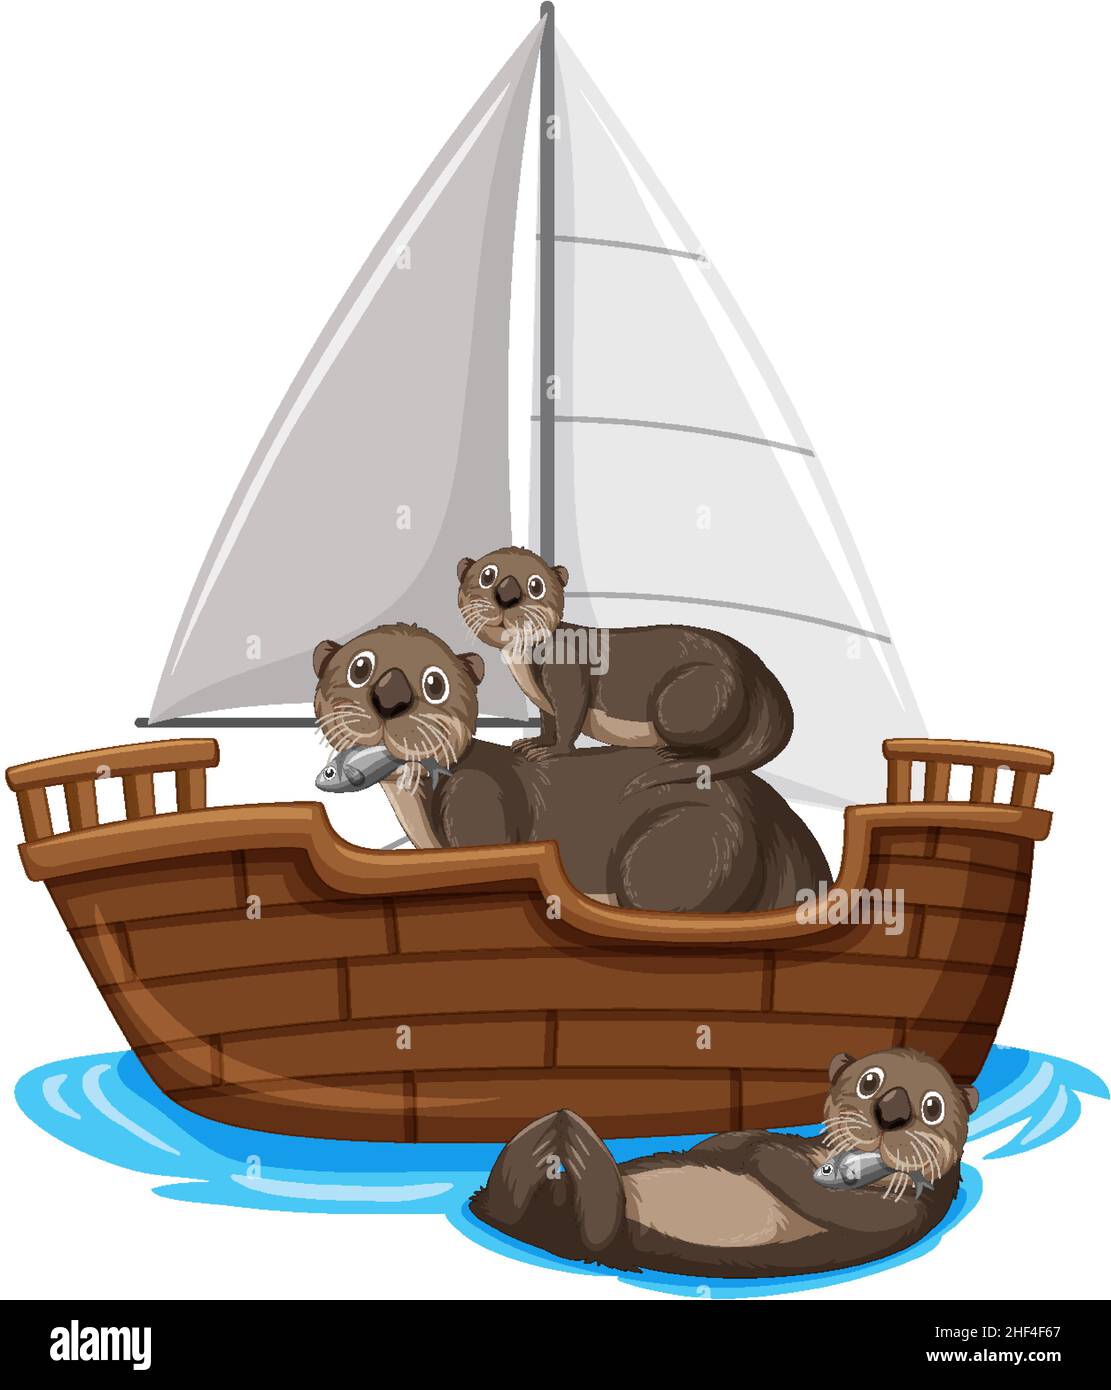 Otters on a ship in cartoon style illustration Stock Vector